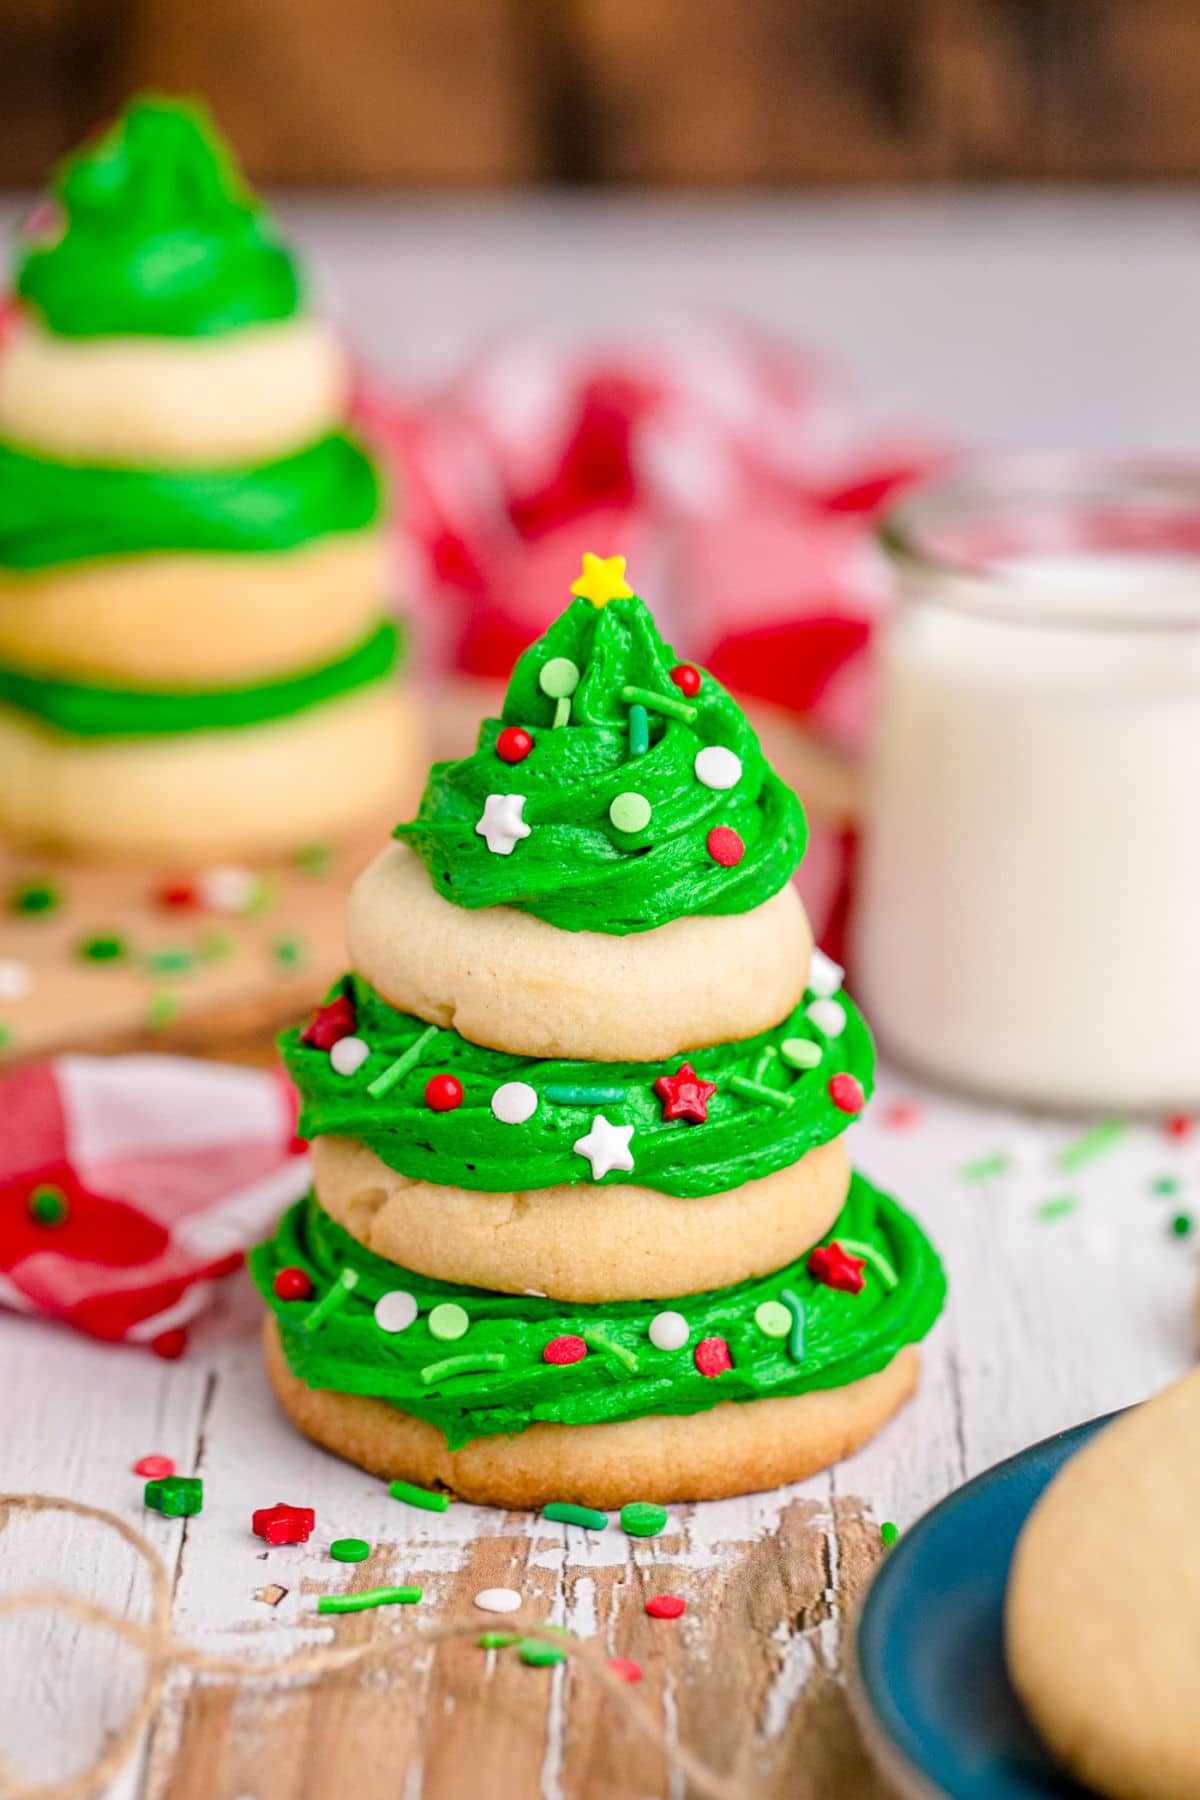 image of a stack of sugar cookies with green frosting that makes it look like a christmas tree